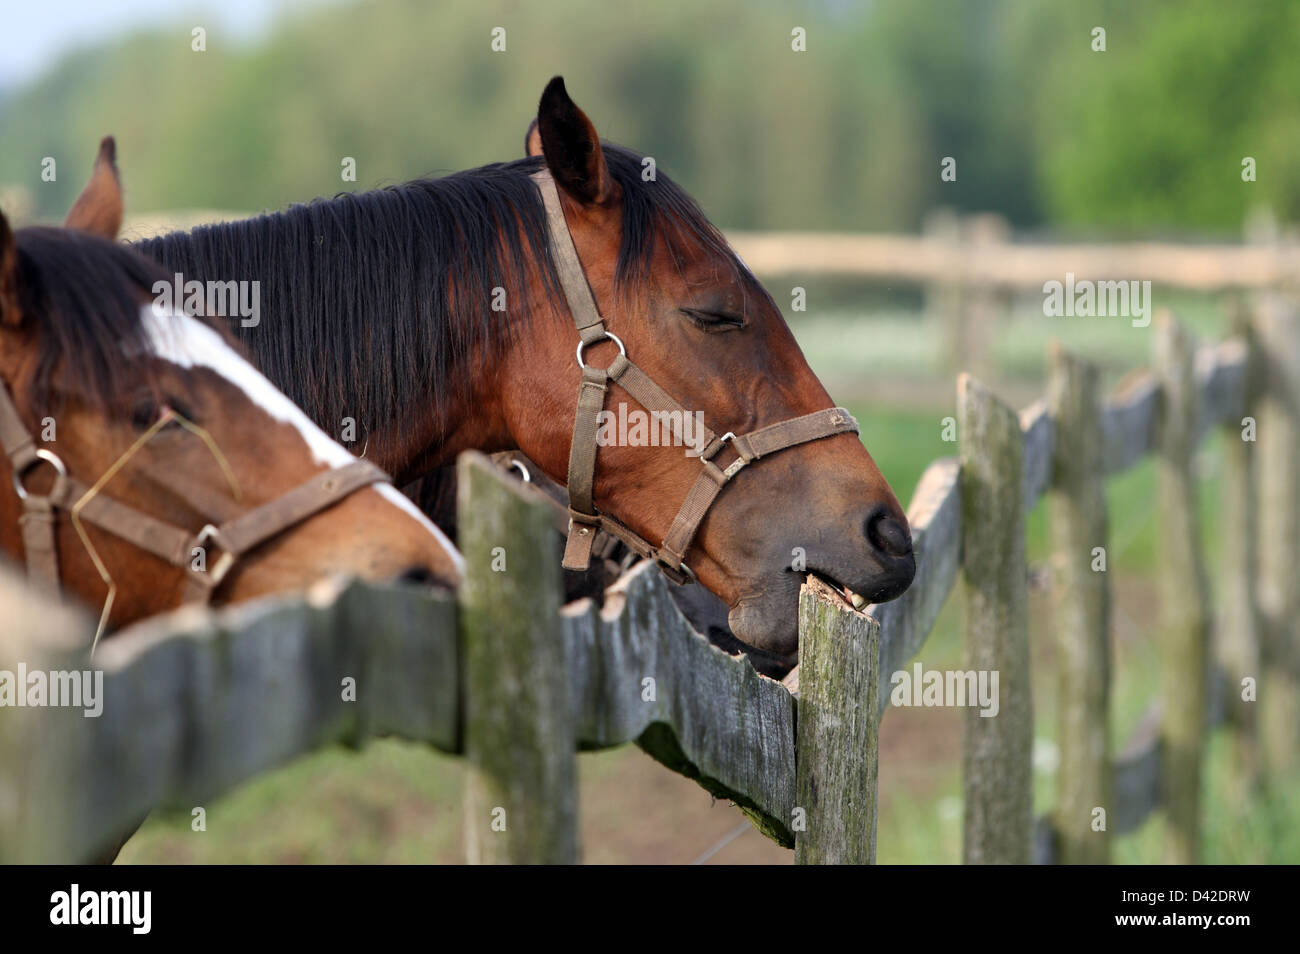 Görlsdorf, Germany, horse gnawing on a wooden fence Stock Photo